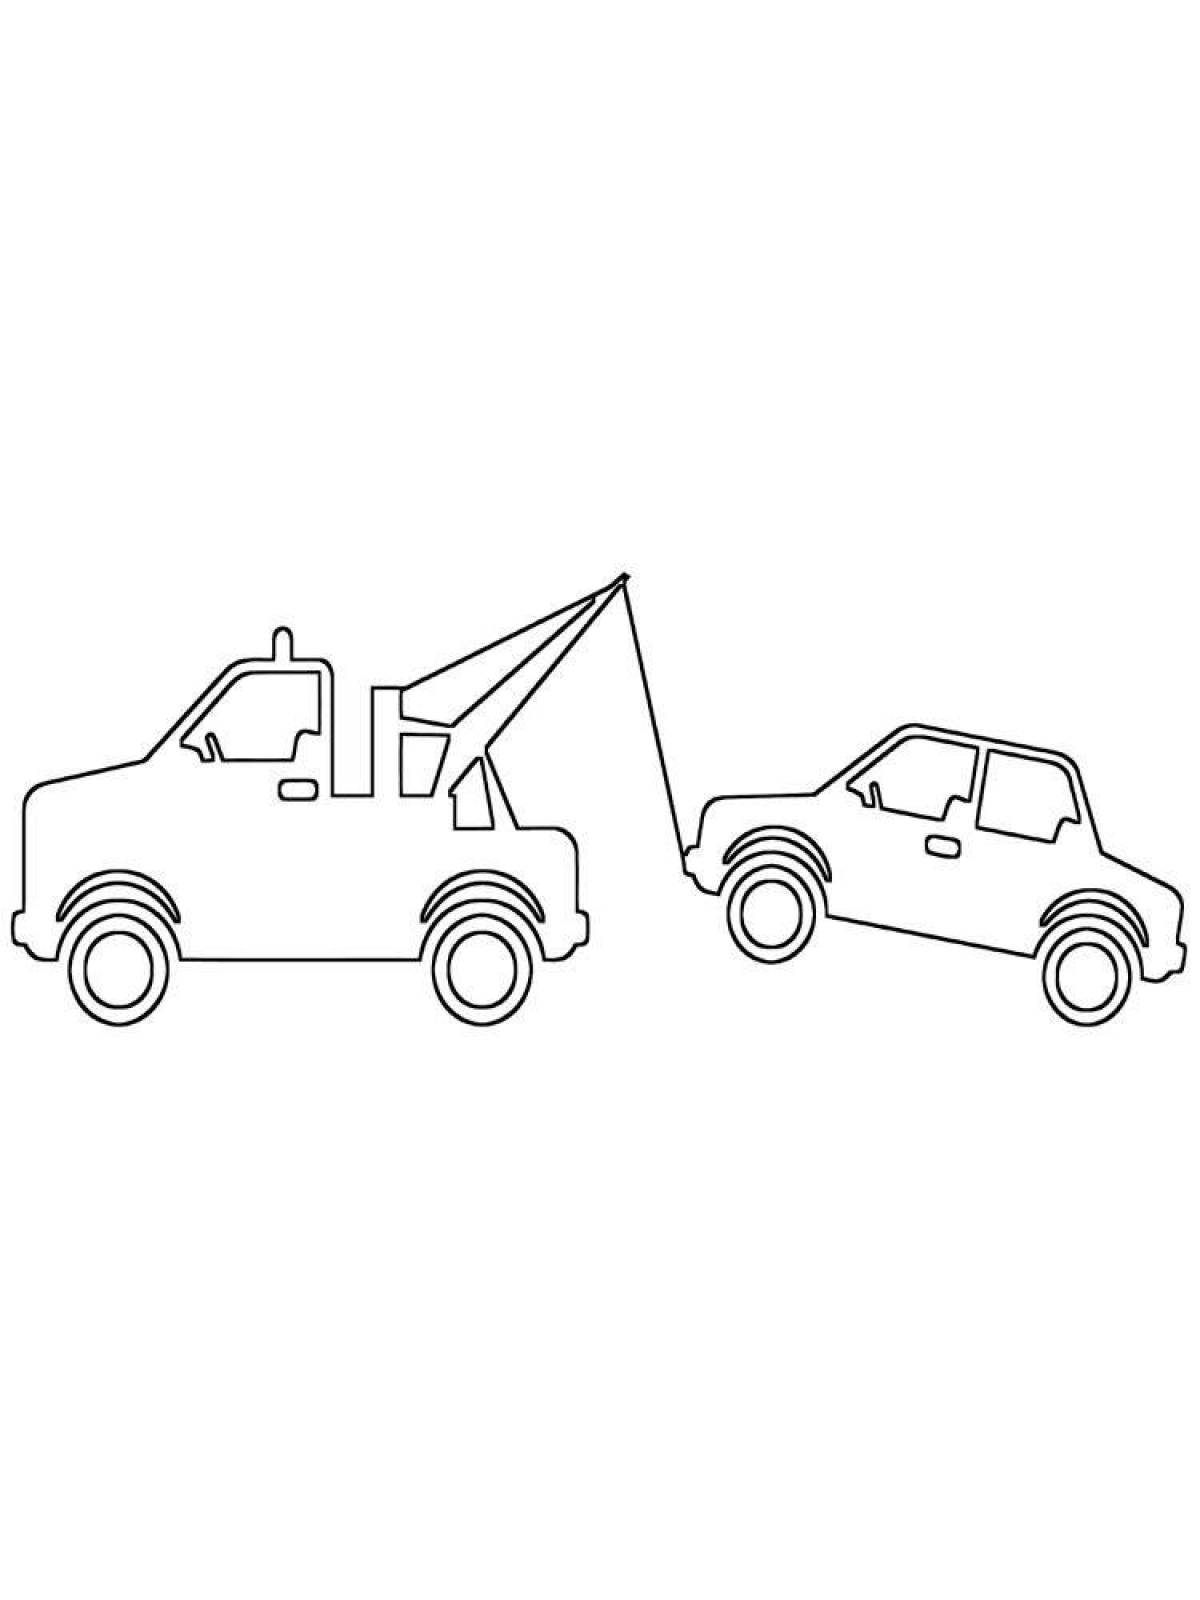 Fashion tow truck coloring page